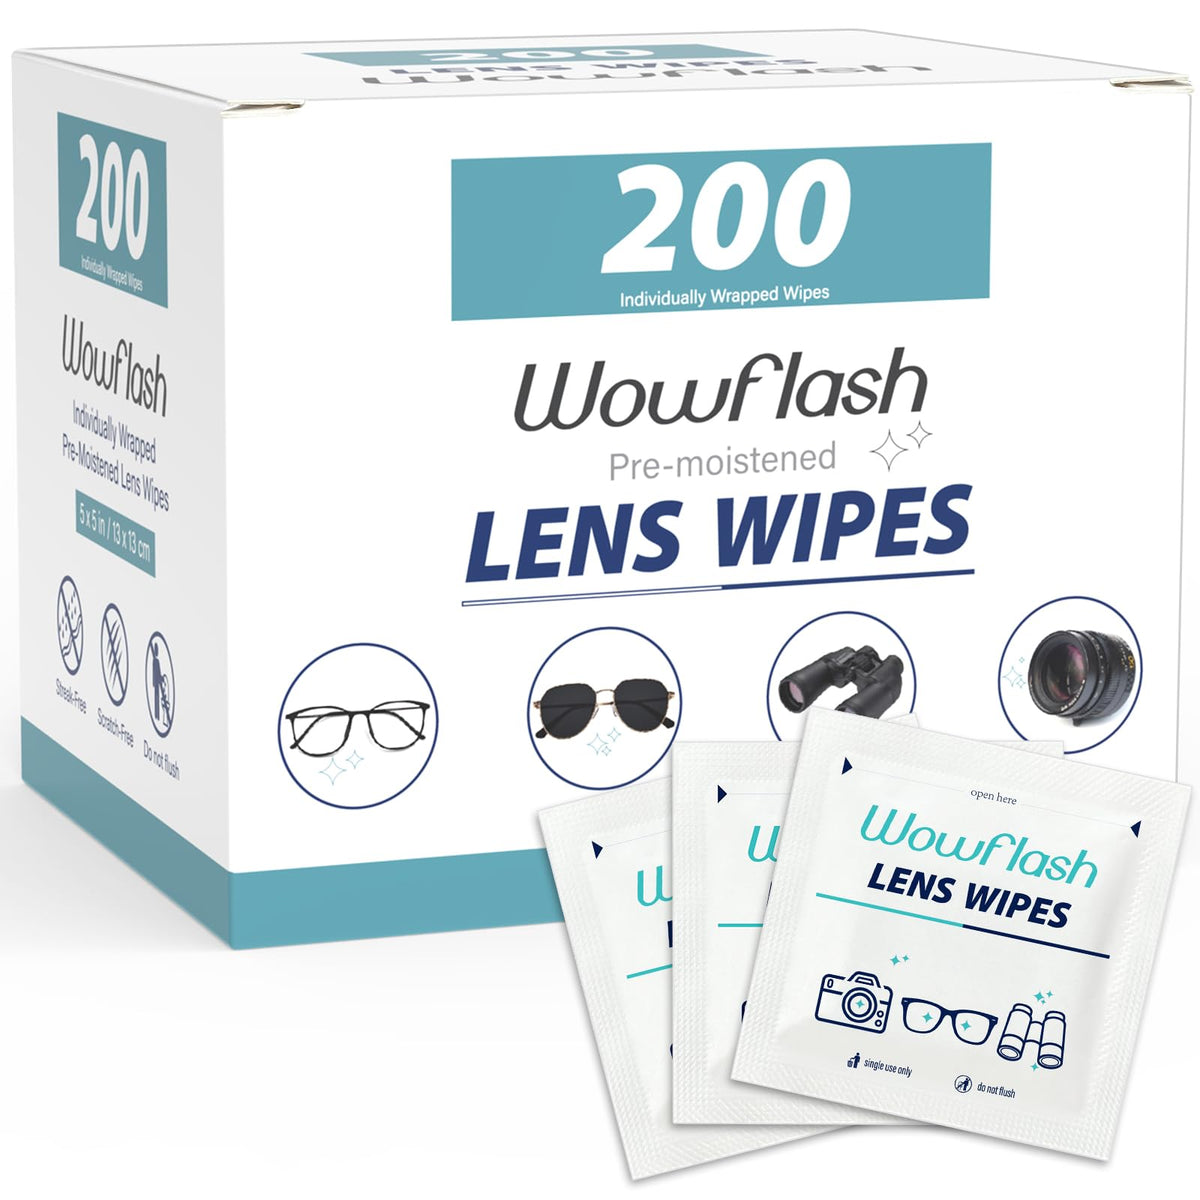 200 Count Lens Wipes for Eyeglasses, Eyeglass Lens Cleaning Wipes Pre-moistened Individually Wrapped Sracth-Free Streak-Free Eye Glasses Cleaner Wipes for Sunglass, Camera Lens, Goggles